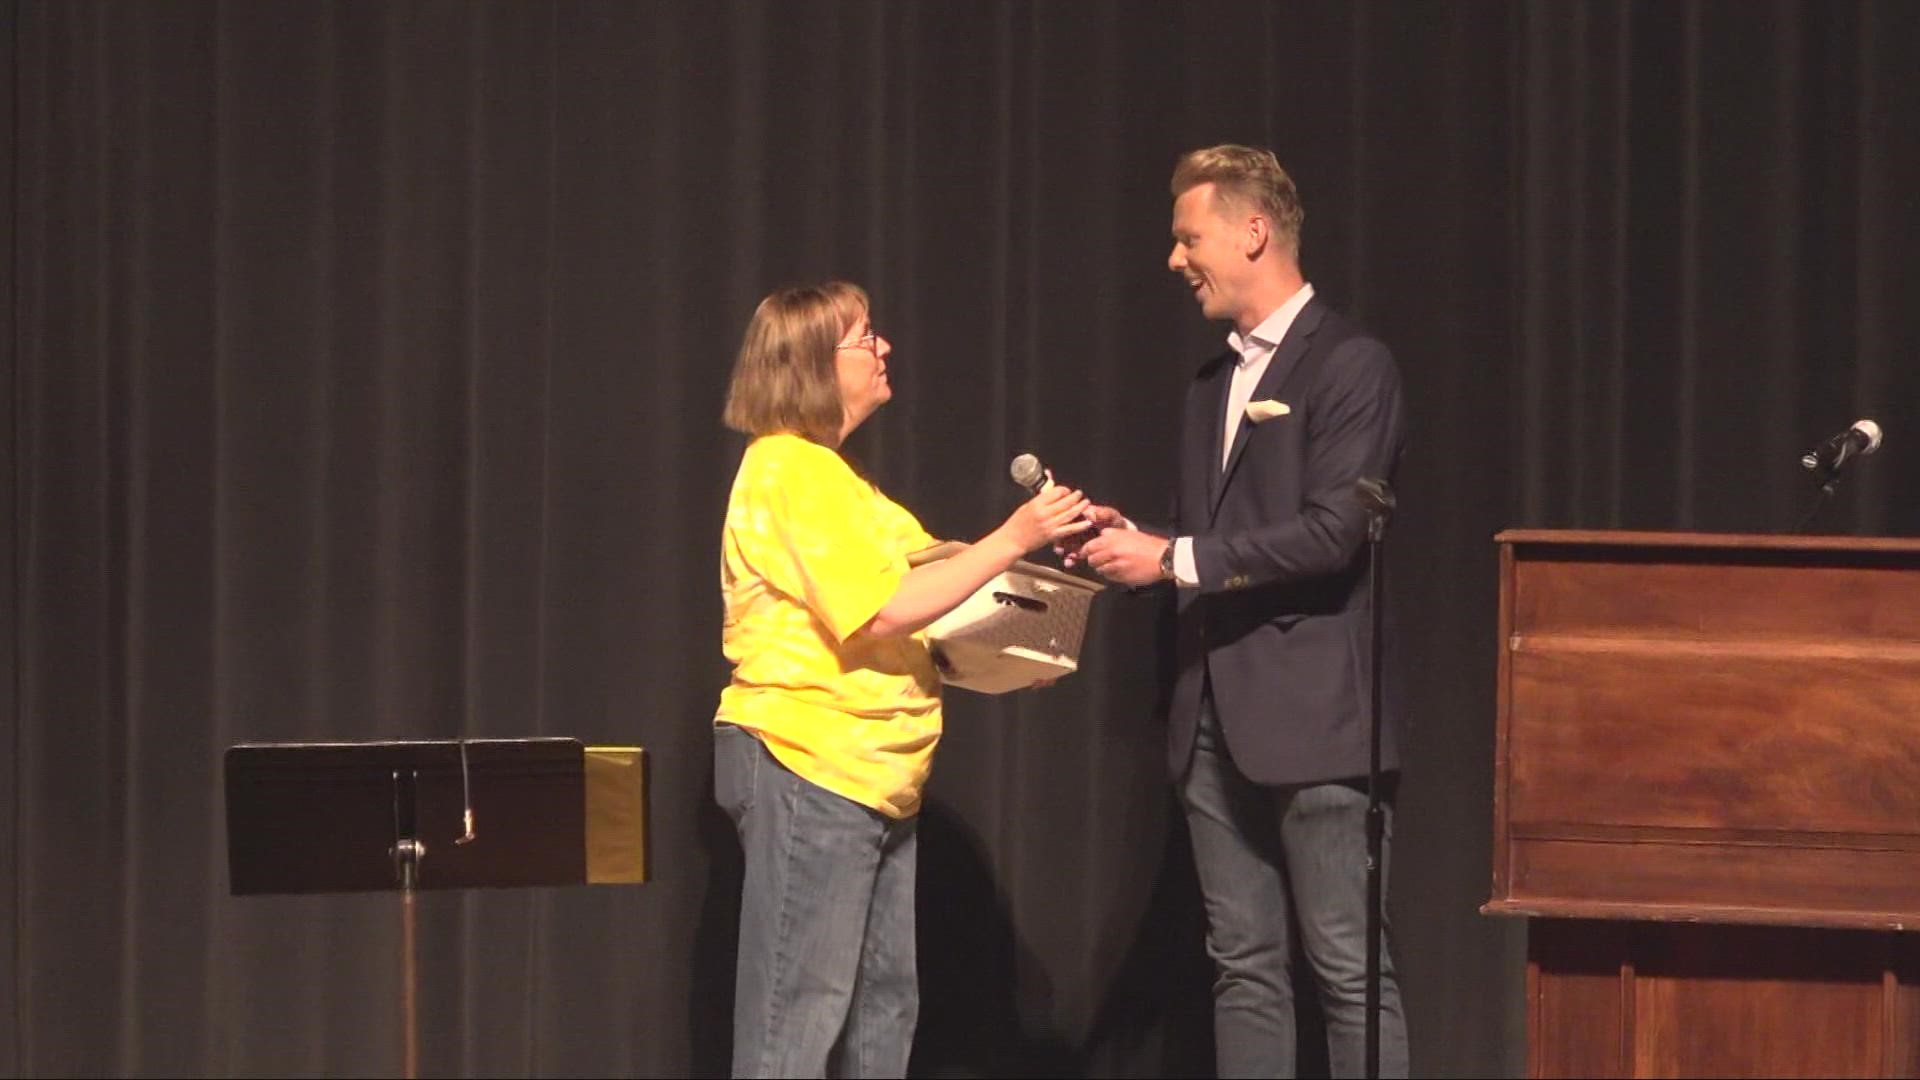 Dr. Beth Hankins, a music teacher at Lakewood High School was honored before heading back to school.